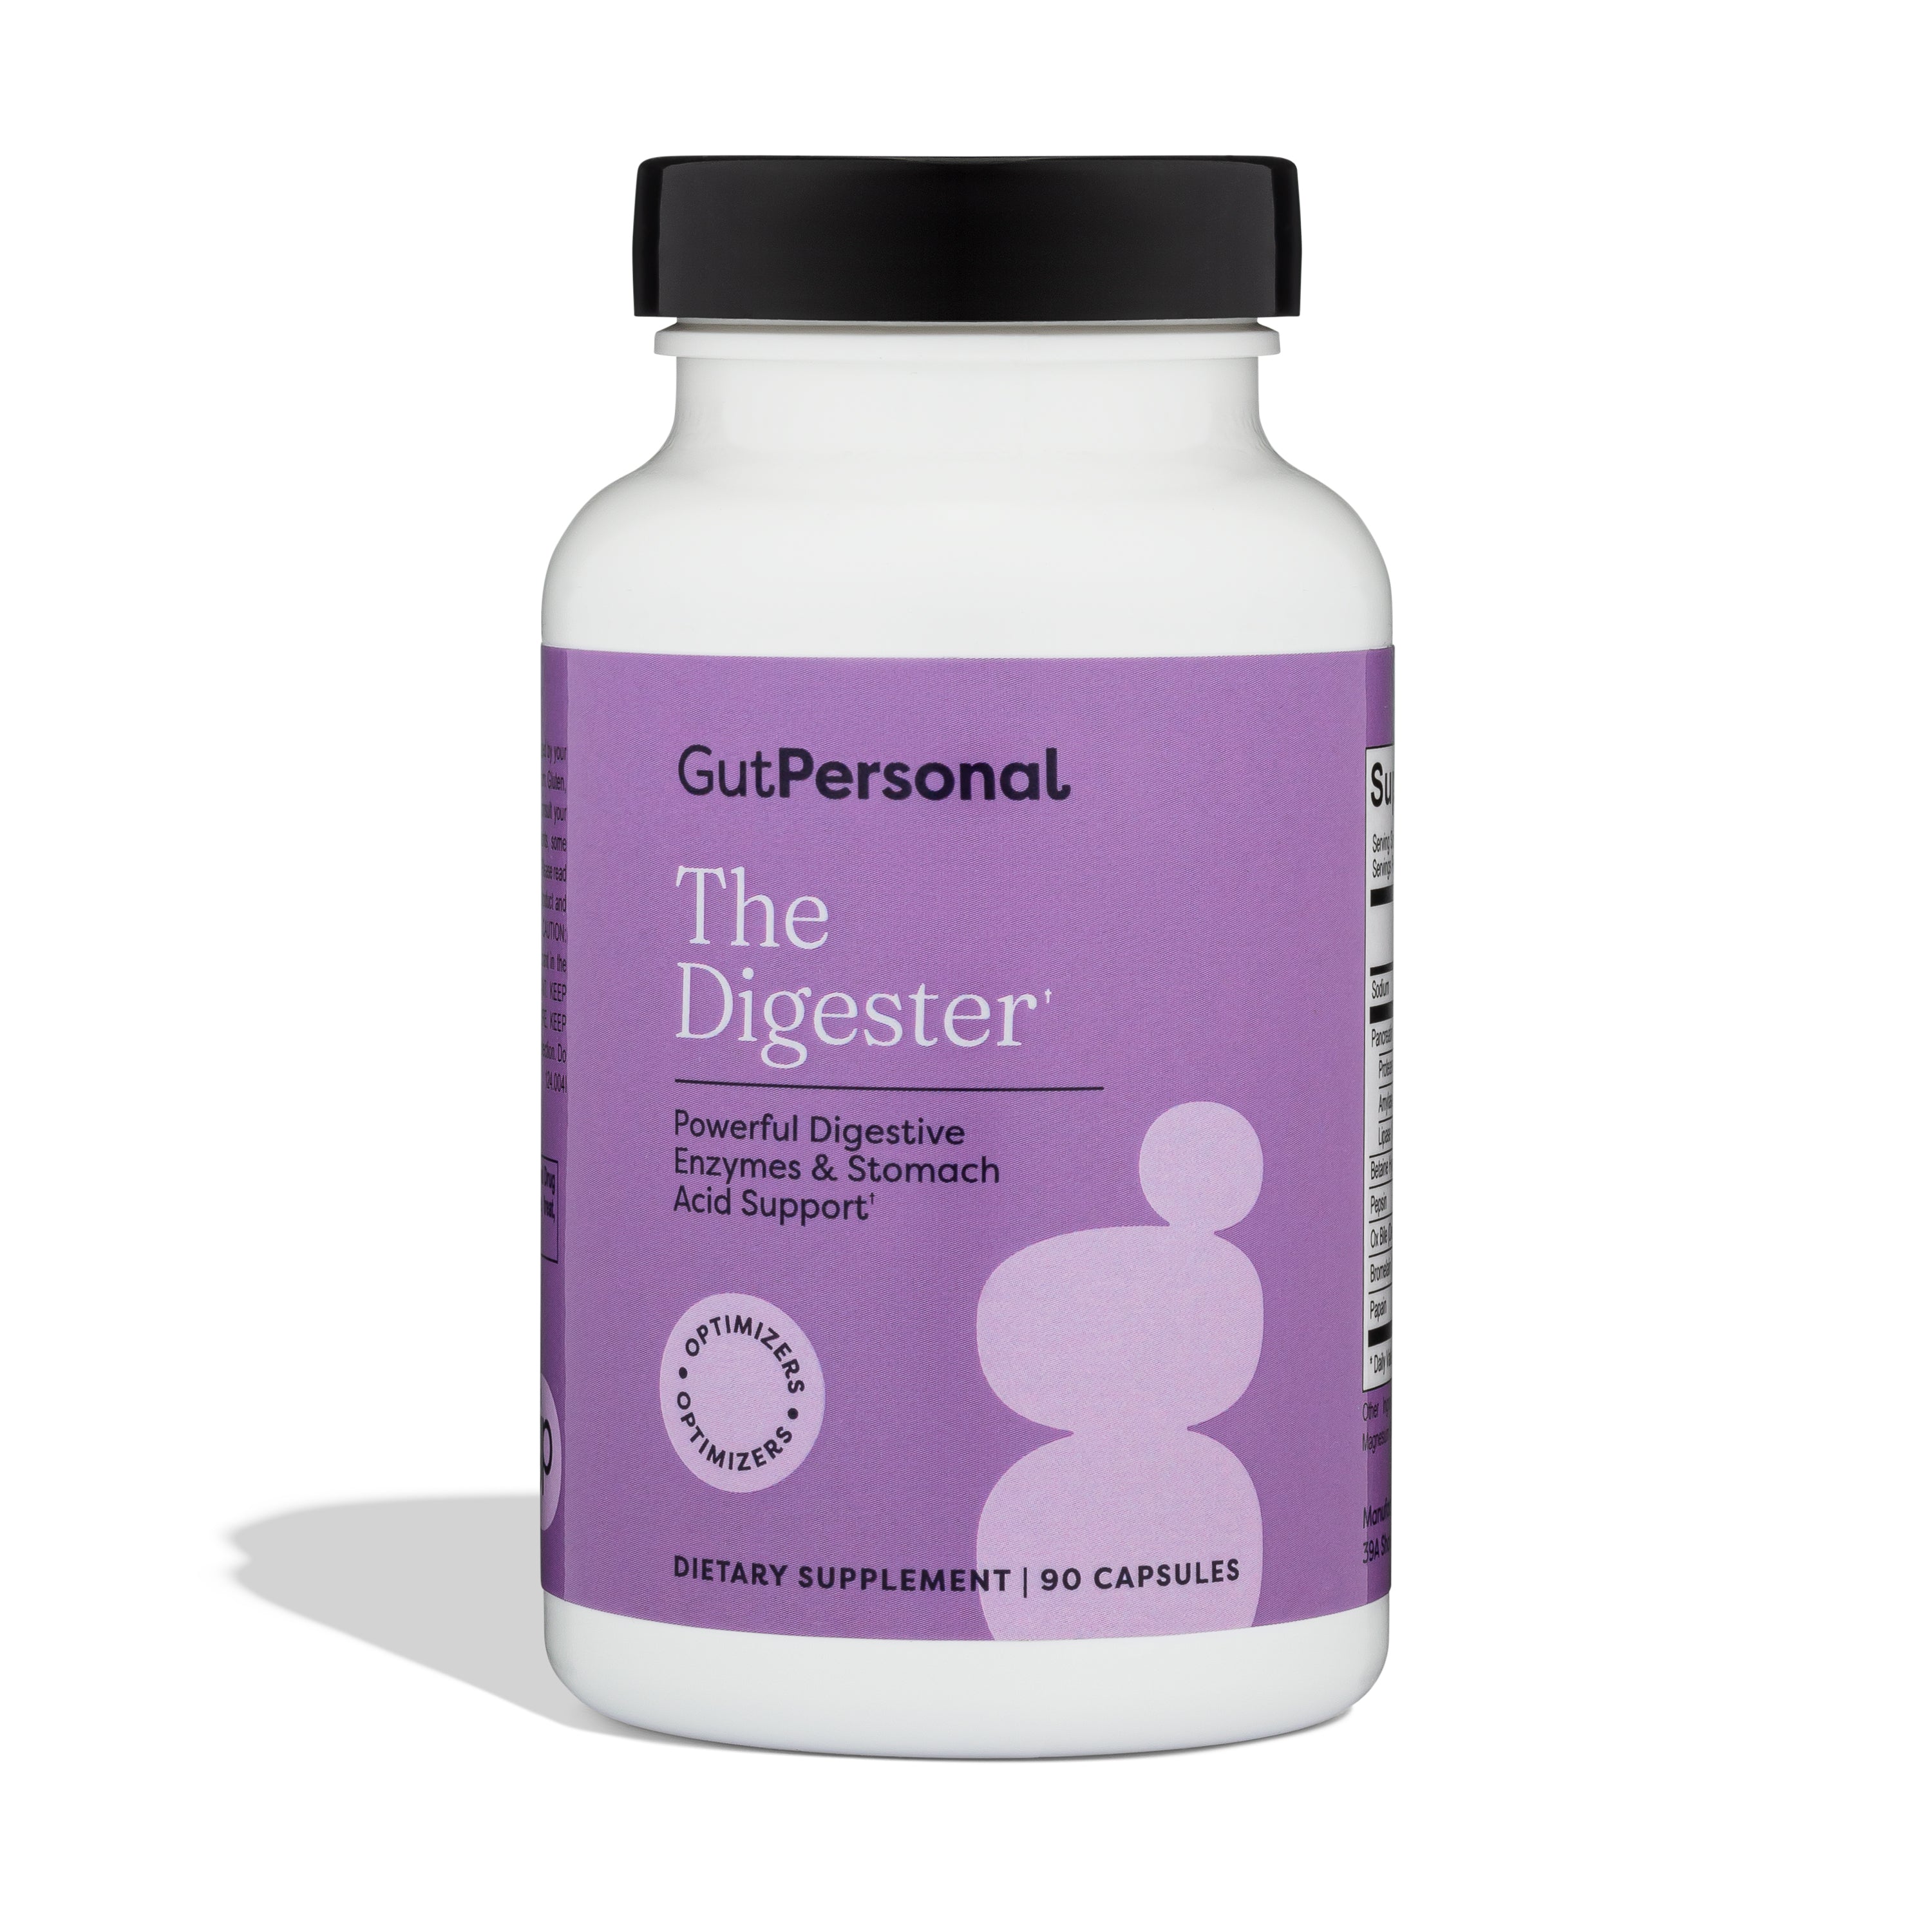 The Digester: Powerful Digestive Enzymes